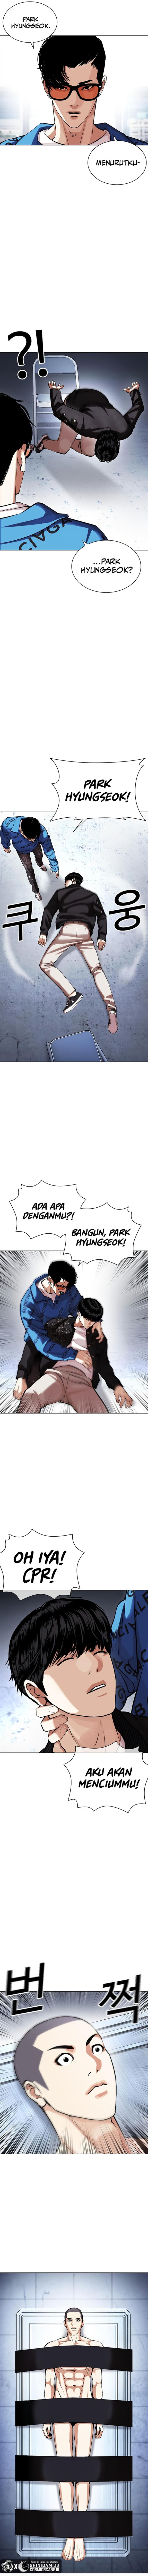 Lookism Chapter 446